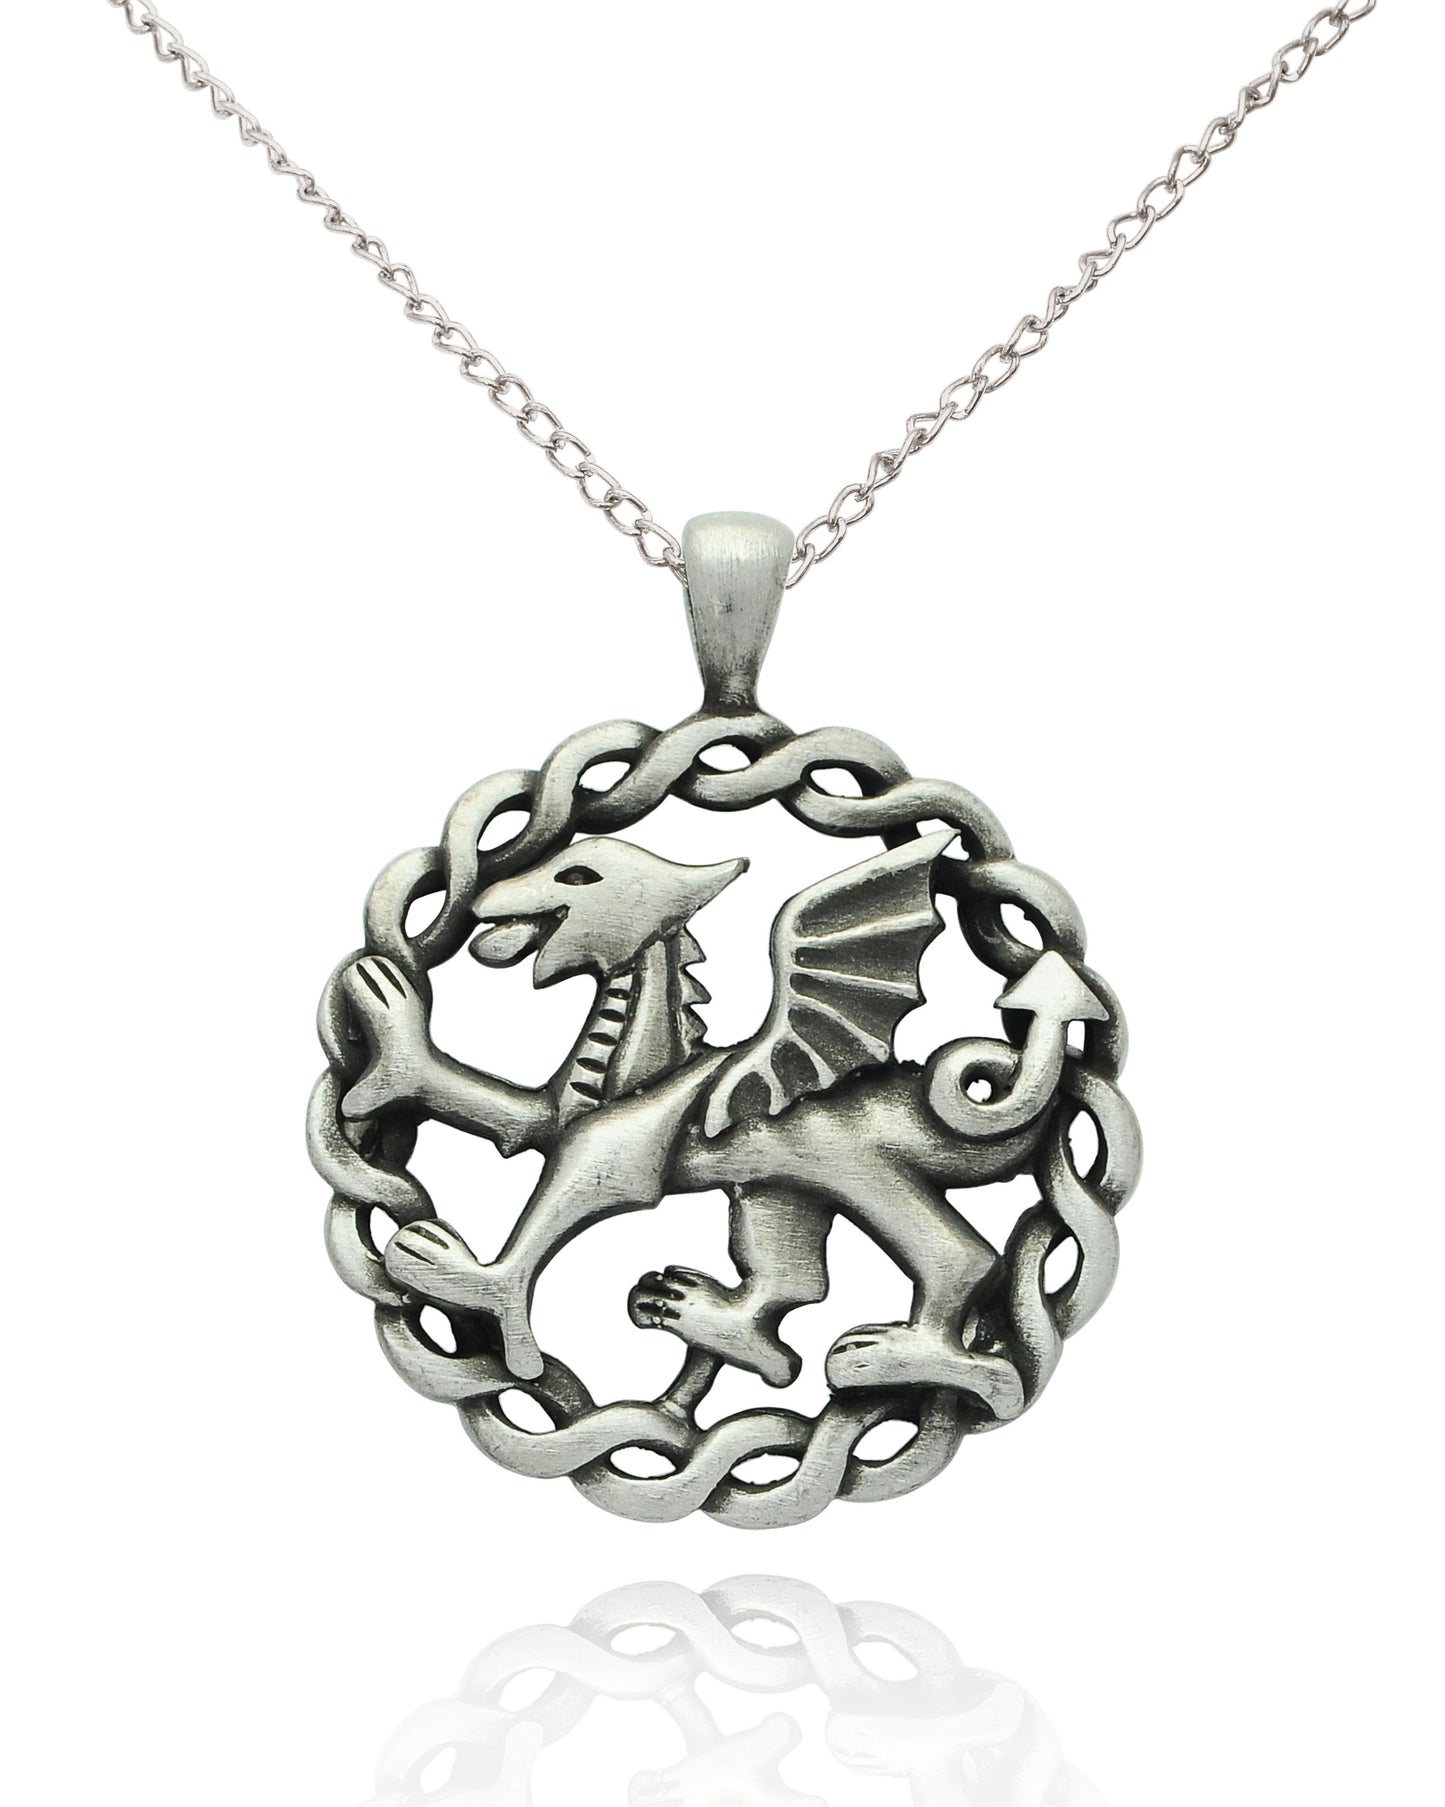 Dragon Amulet Crest Silver Pewter Gold Brass Necklace Pendant Jewelry